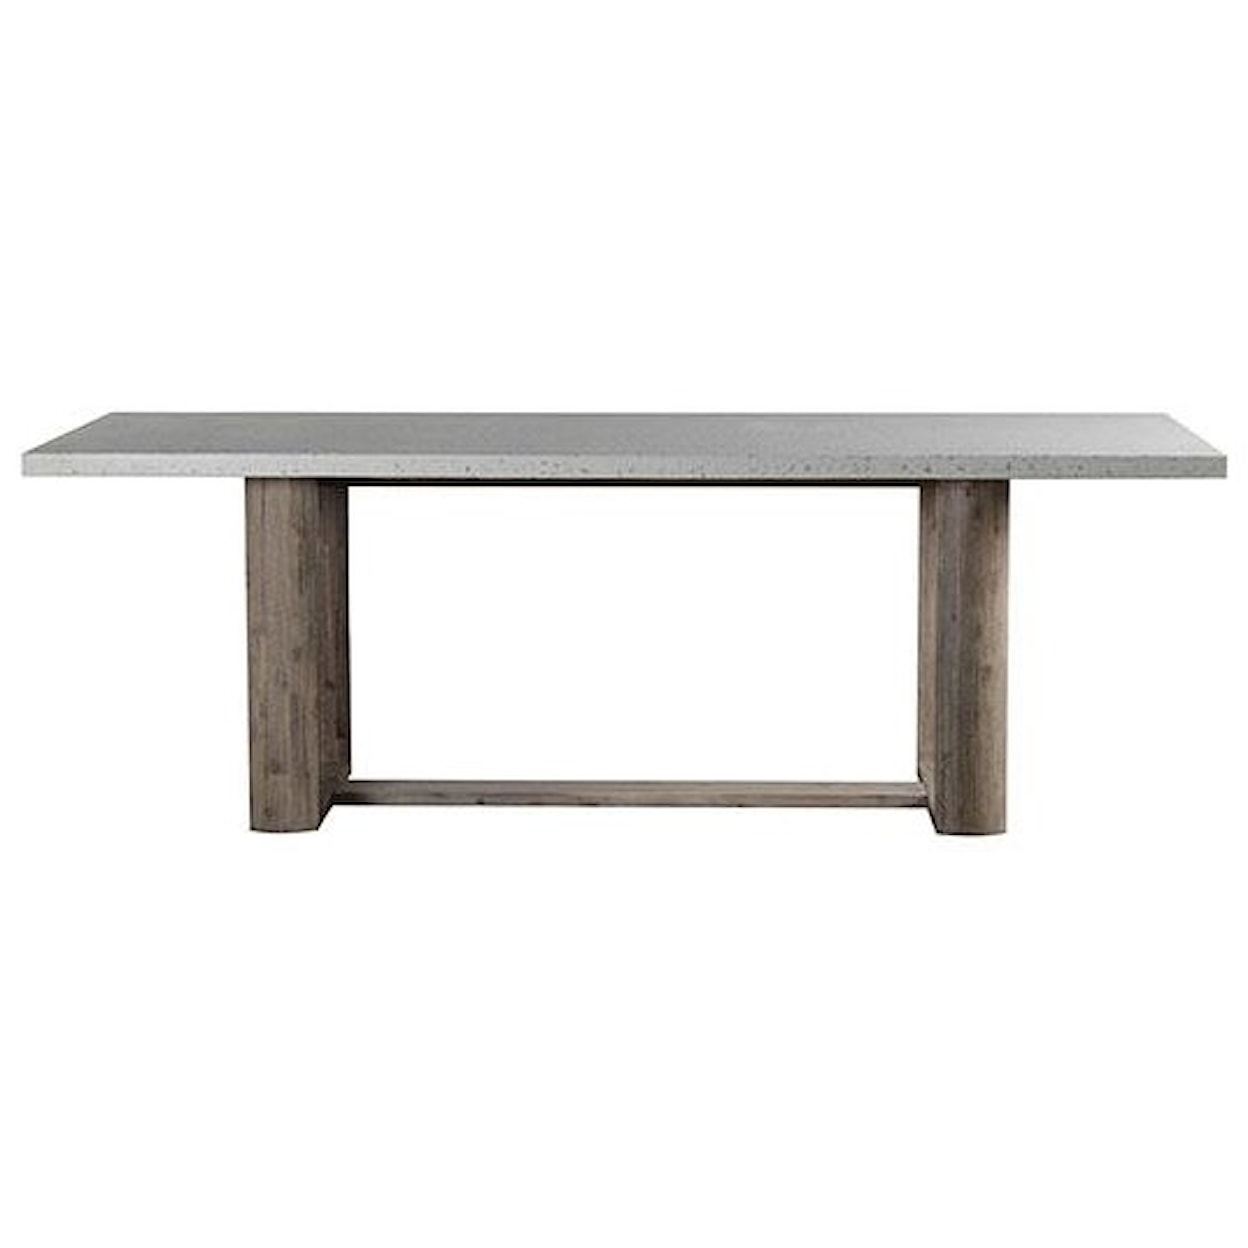 Dovetail Furniture Dining Tables Durano Dining Table